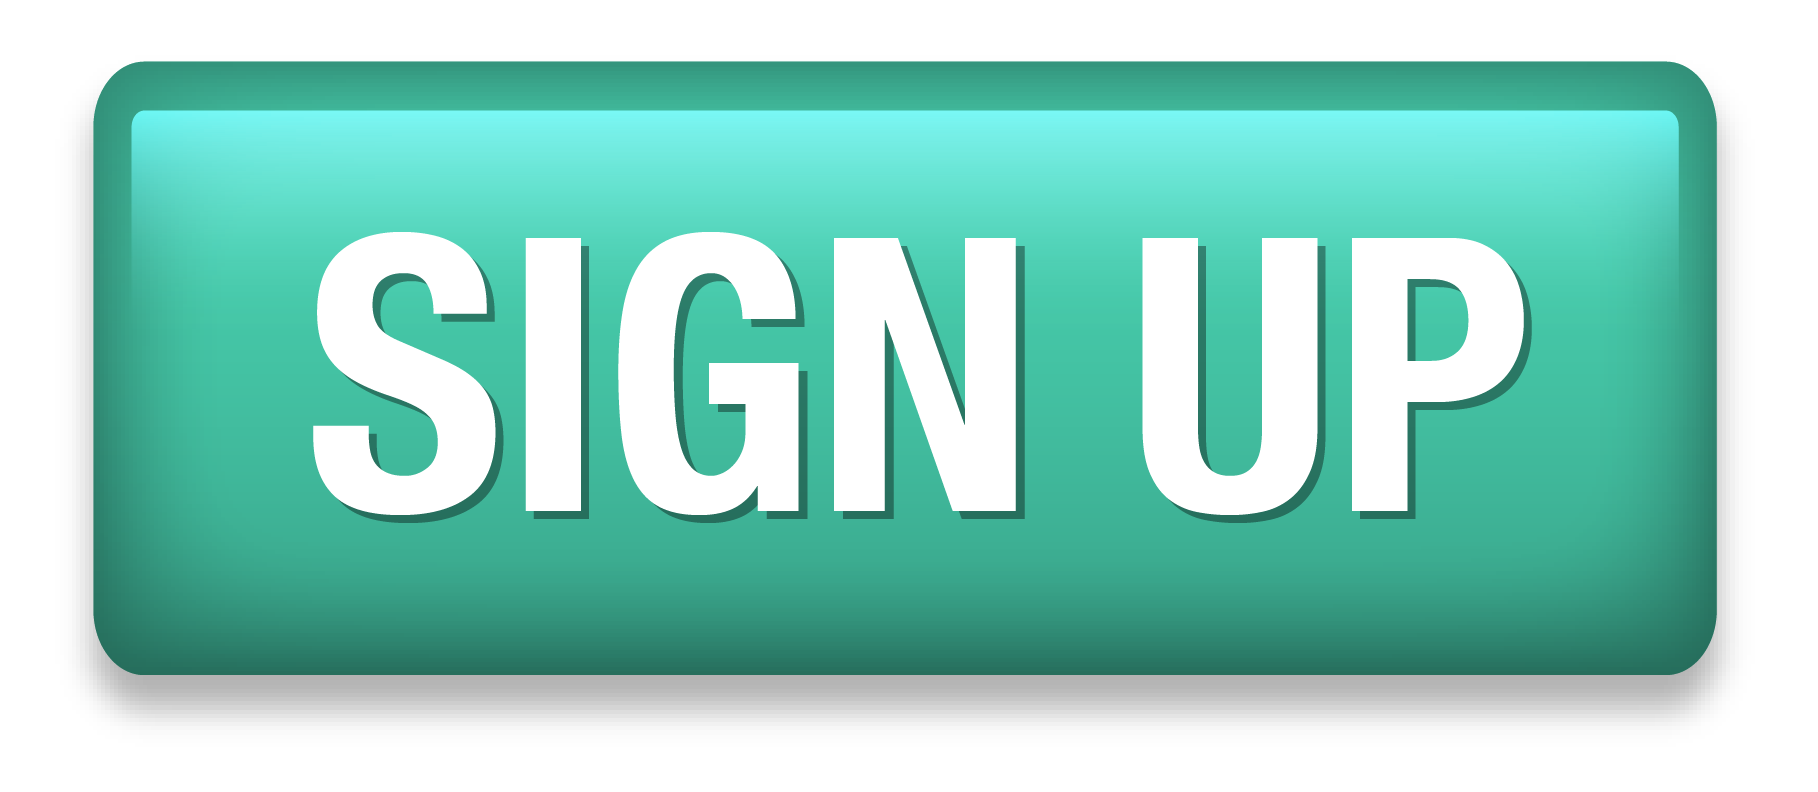 Sign Up PNG Images Transparent Background | PNG Play